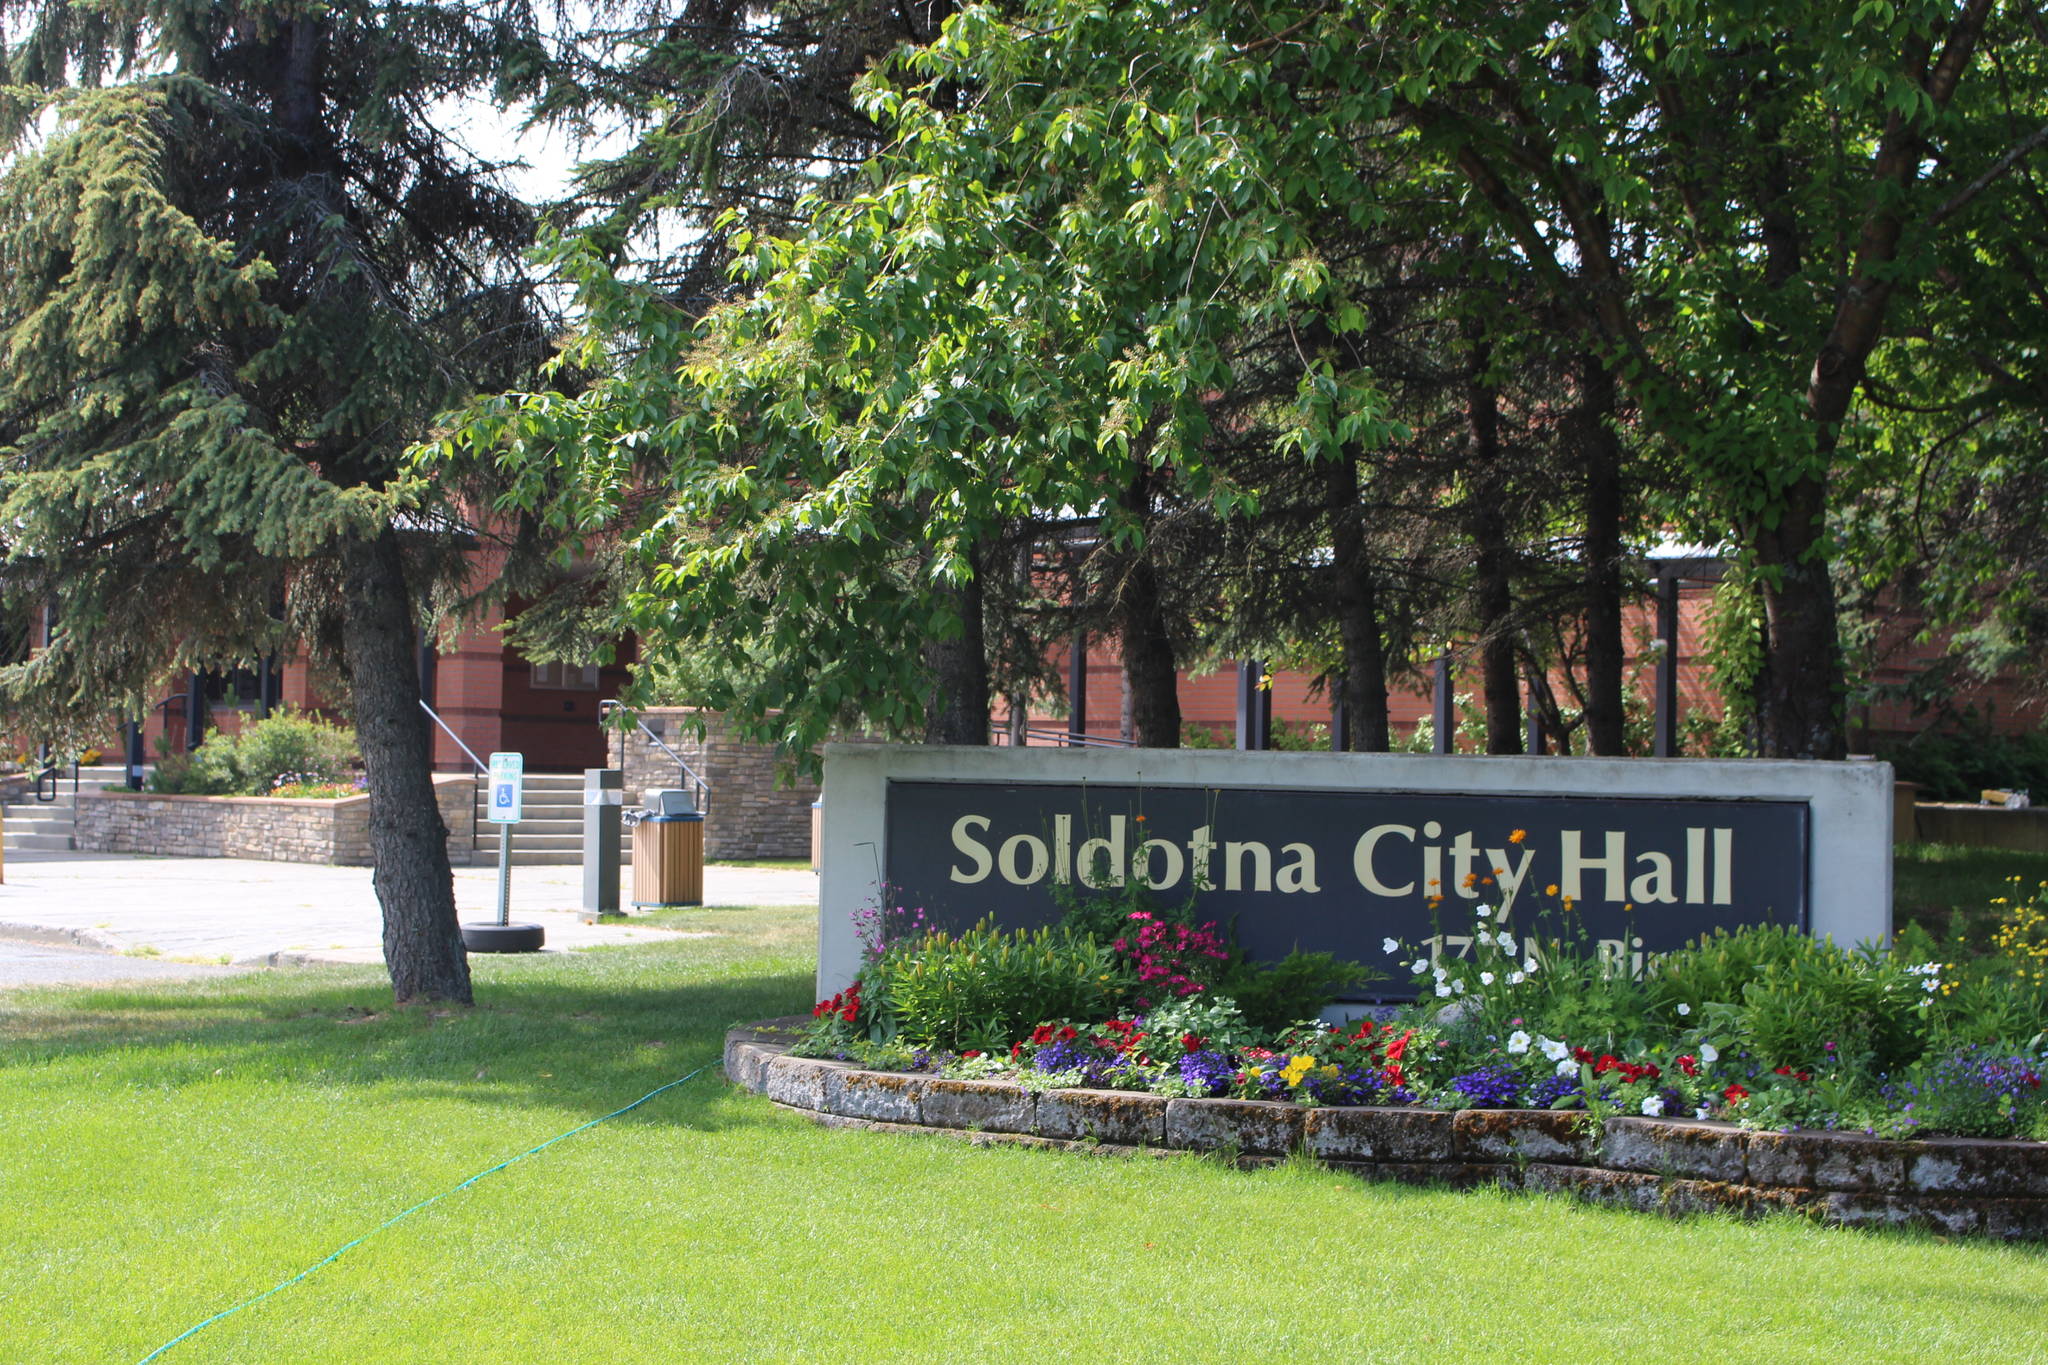 The sign outside Soldotna City Hall is seen here on July 16, 2020. (Photo by Brian Mazurek/Peninsula Clarion)